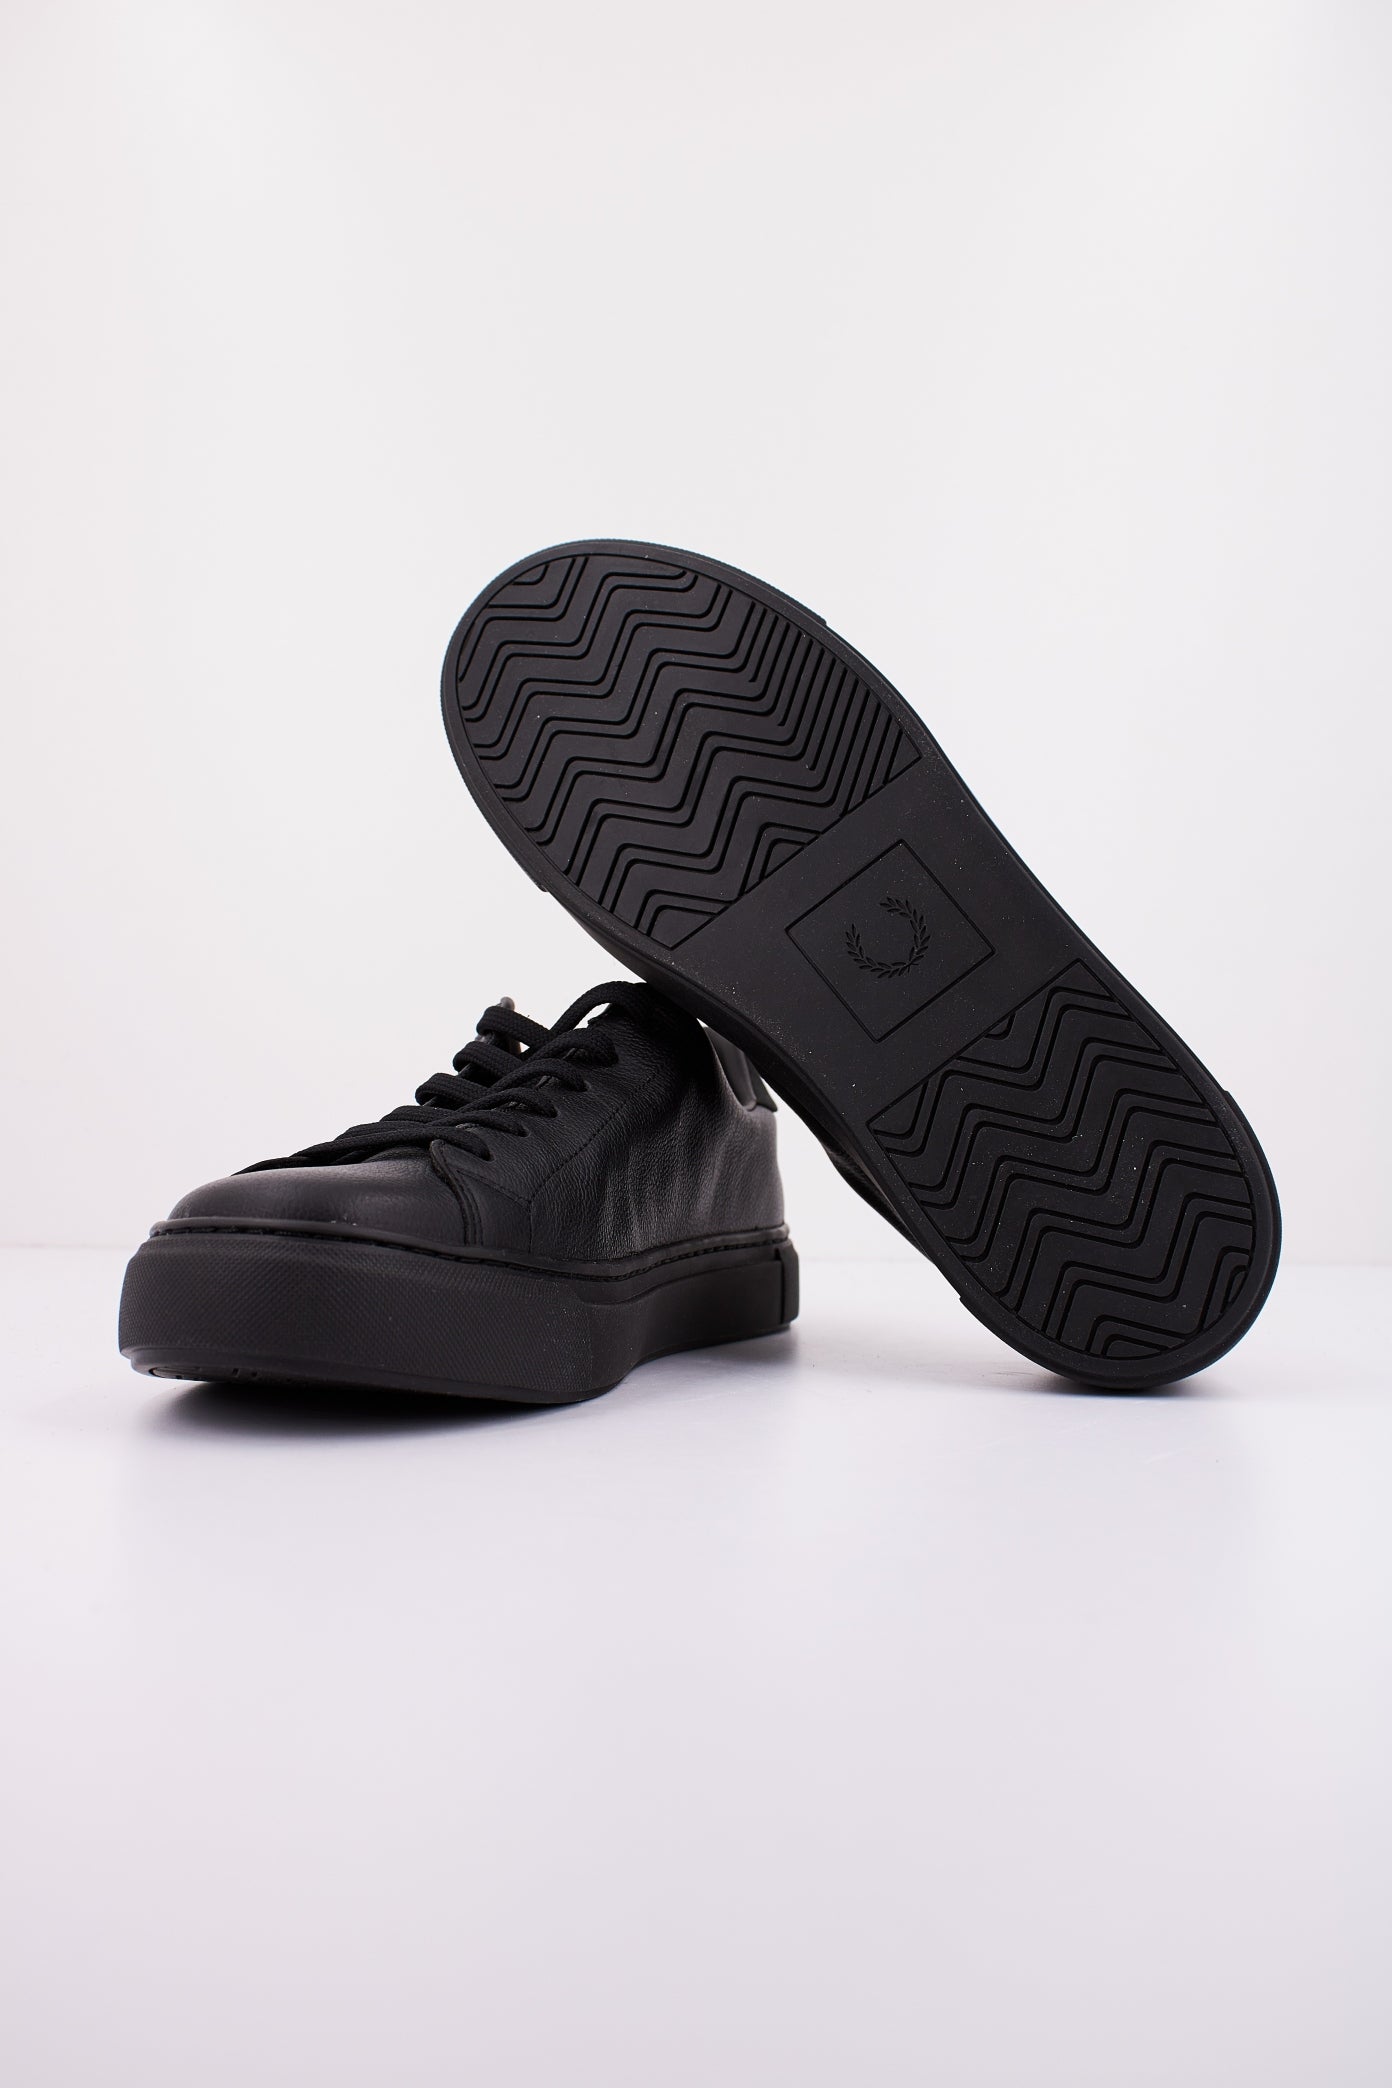 FRED PERRY B TUMBLED LEATHER en color NEGRO  (4)